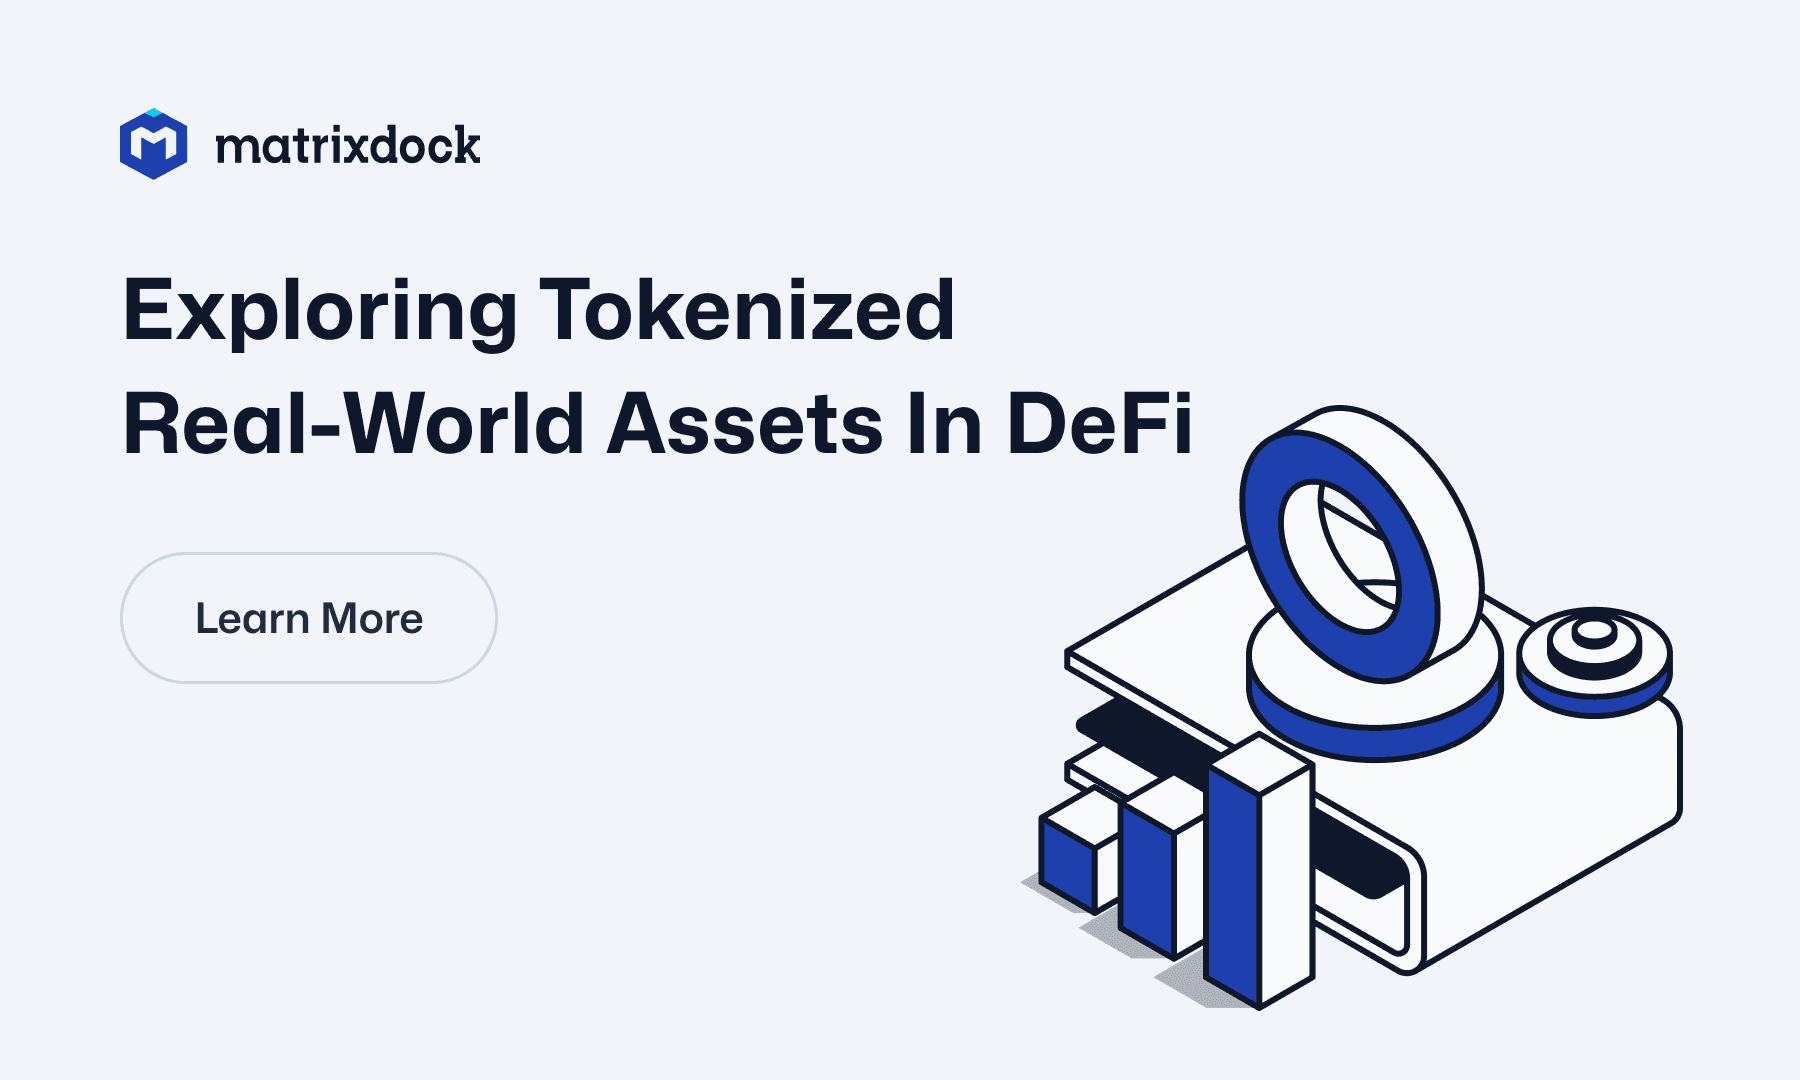 Exploring Tokenized Real-World Assets In DeFi